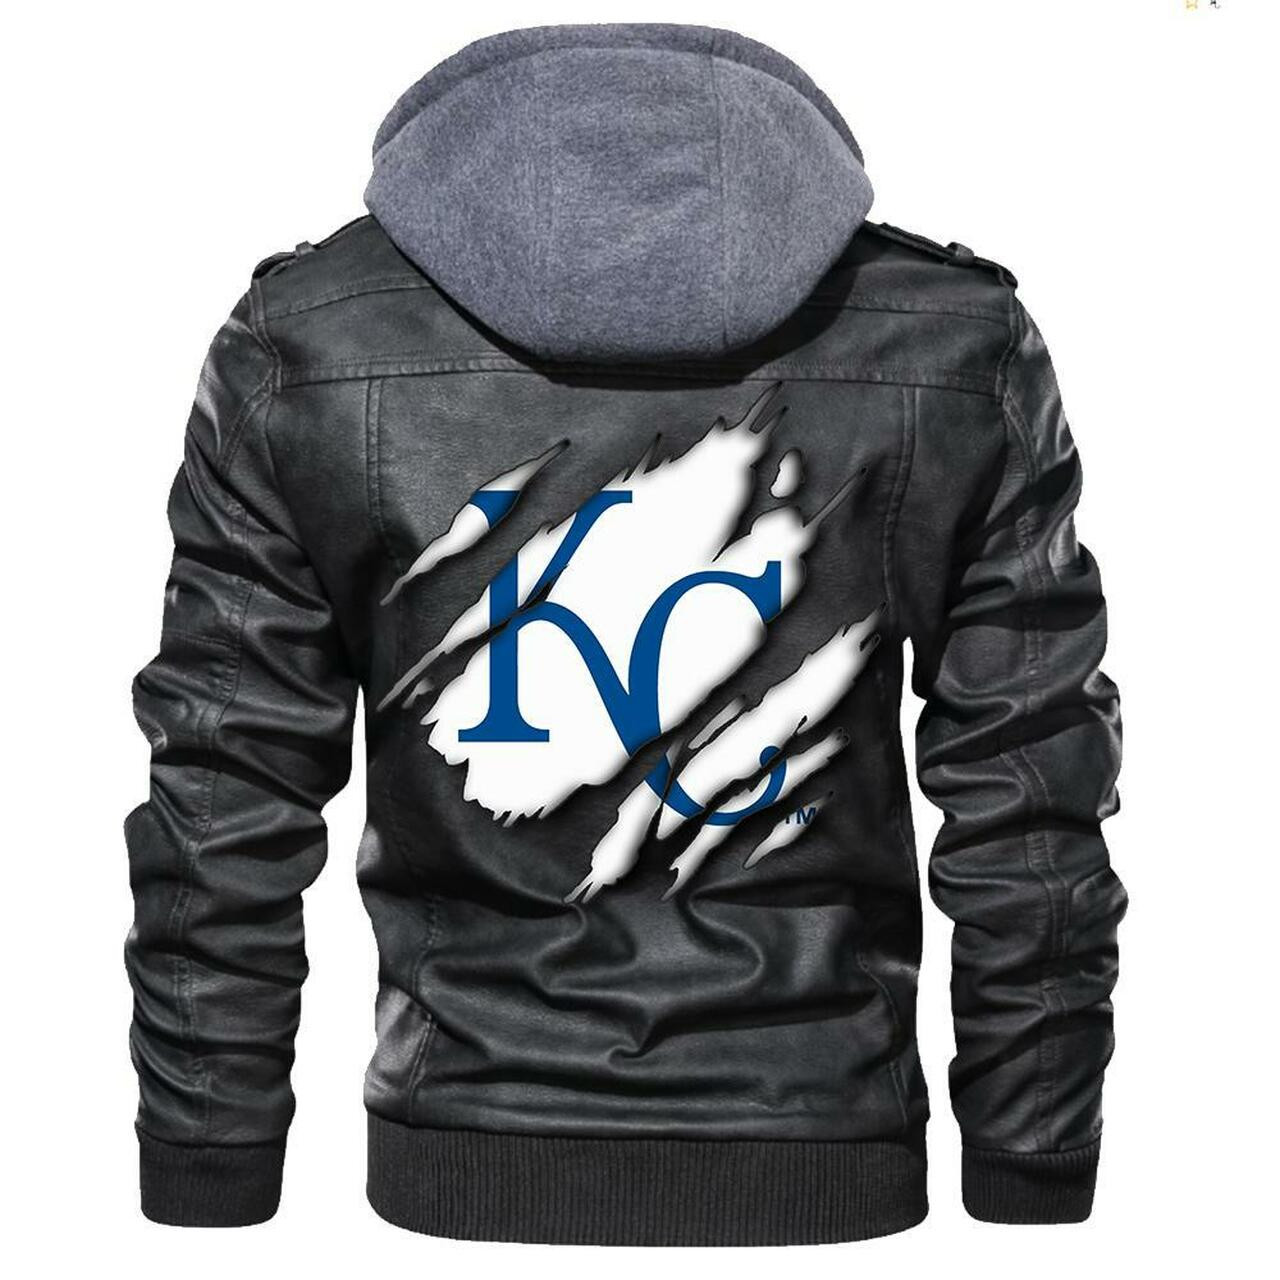 Check out and find the right leather jacket below 203